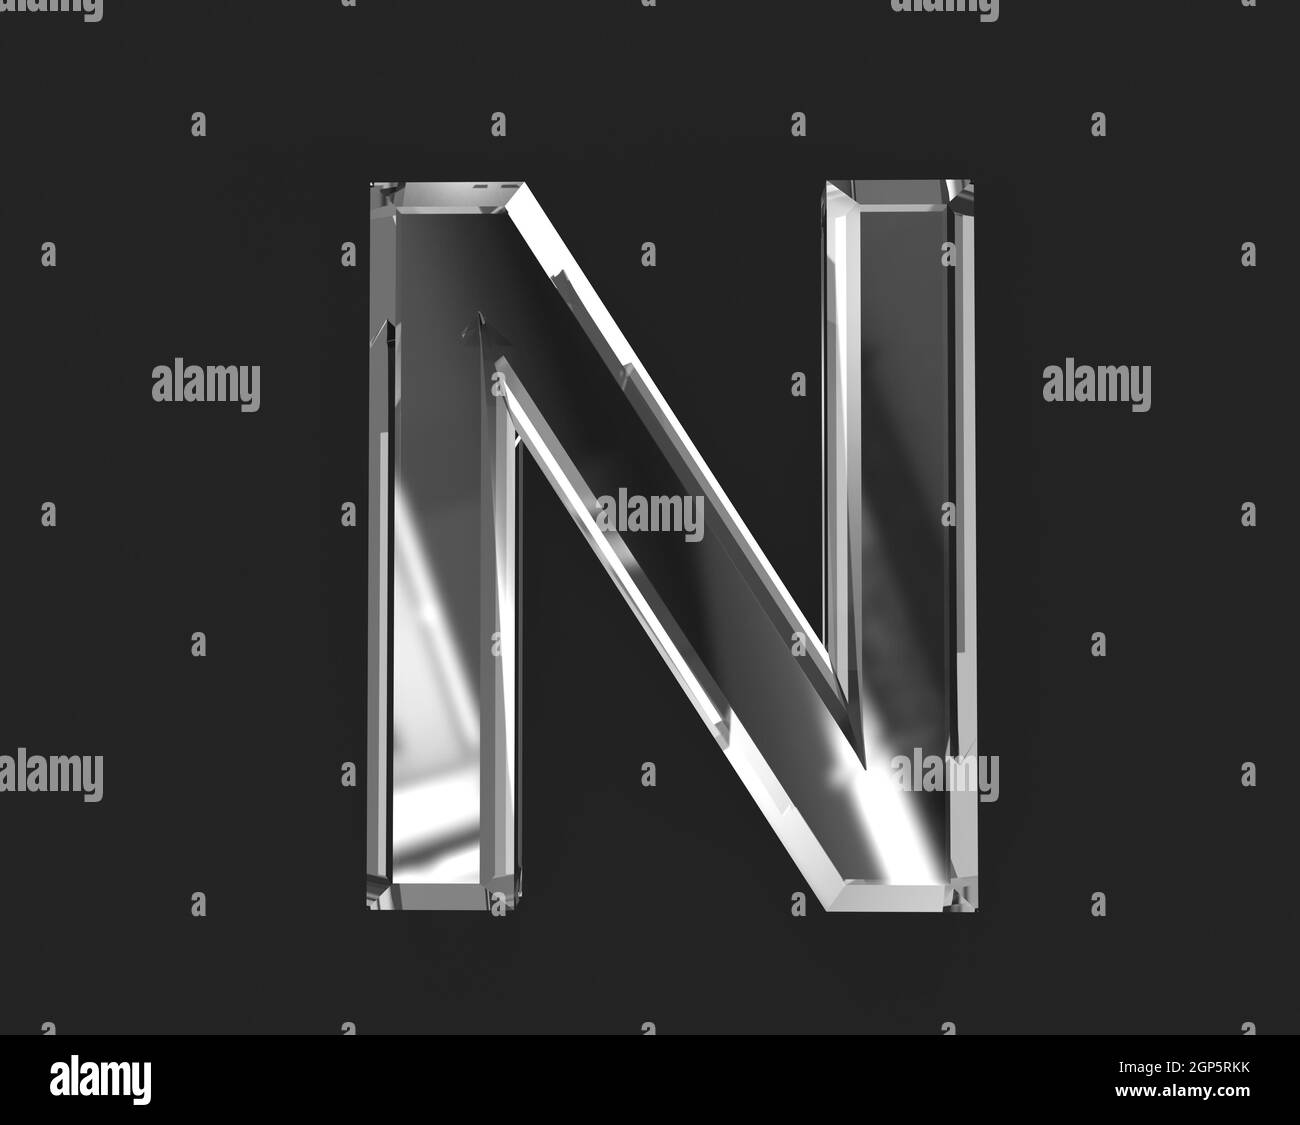 Neon letters alphabet Black and White Stock Photos & Images - Alamy